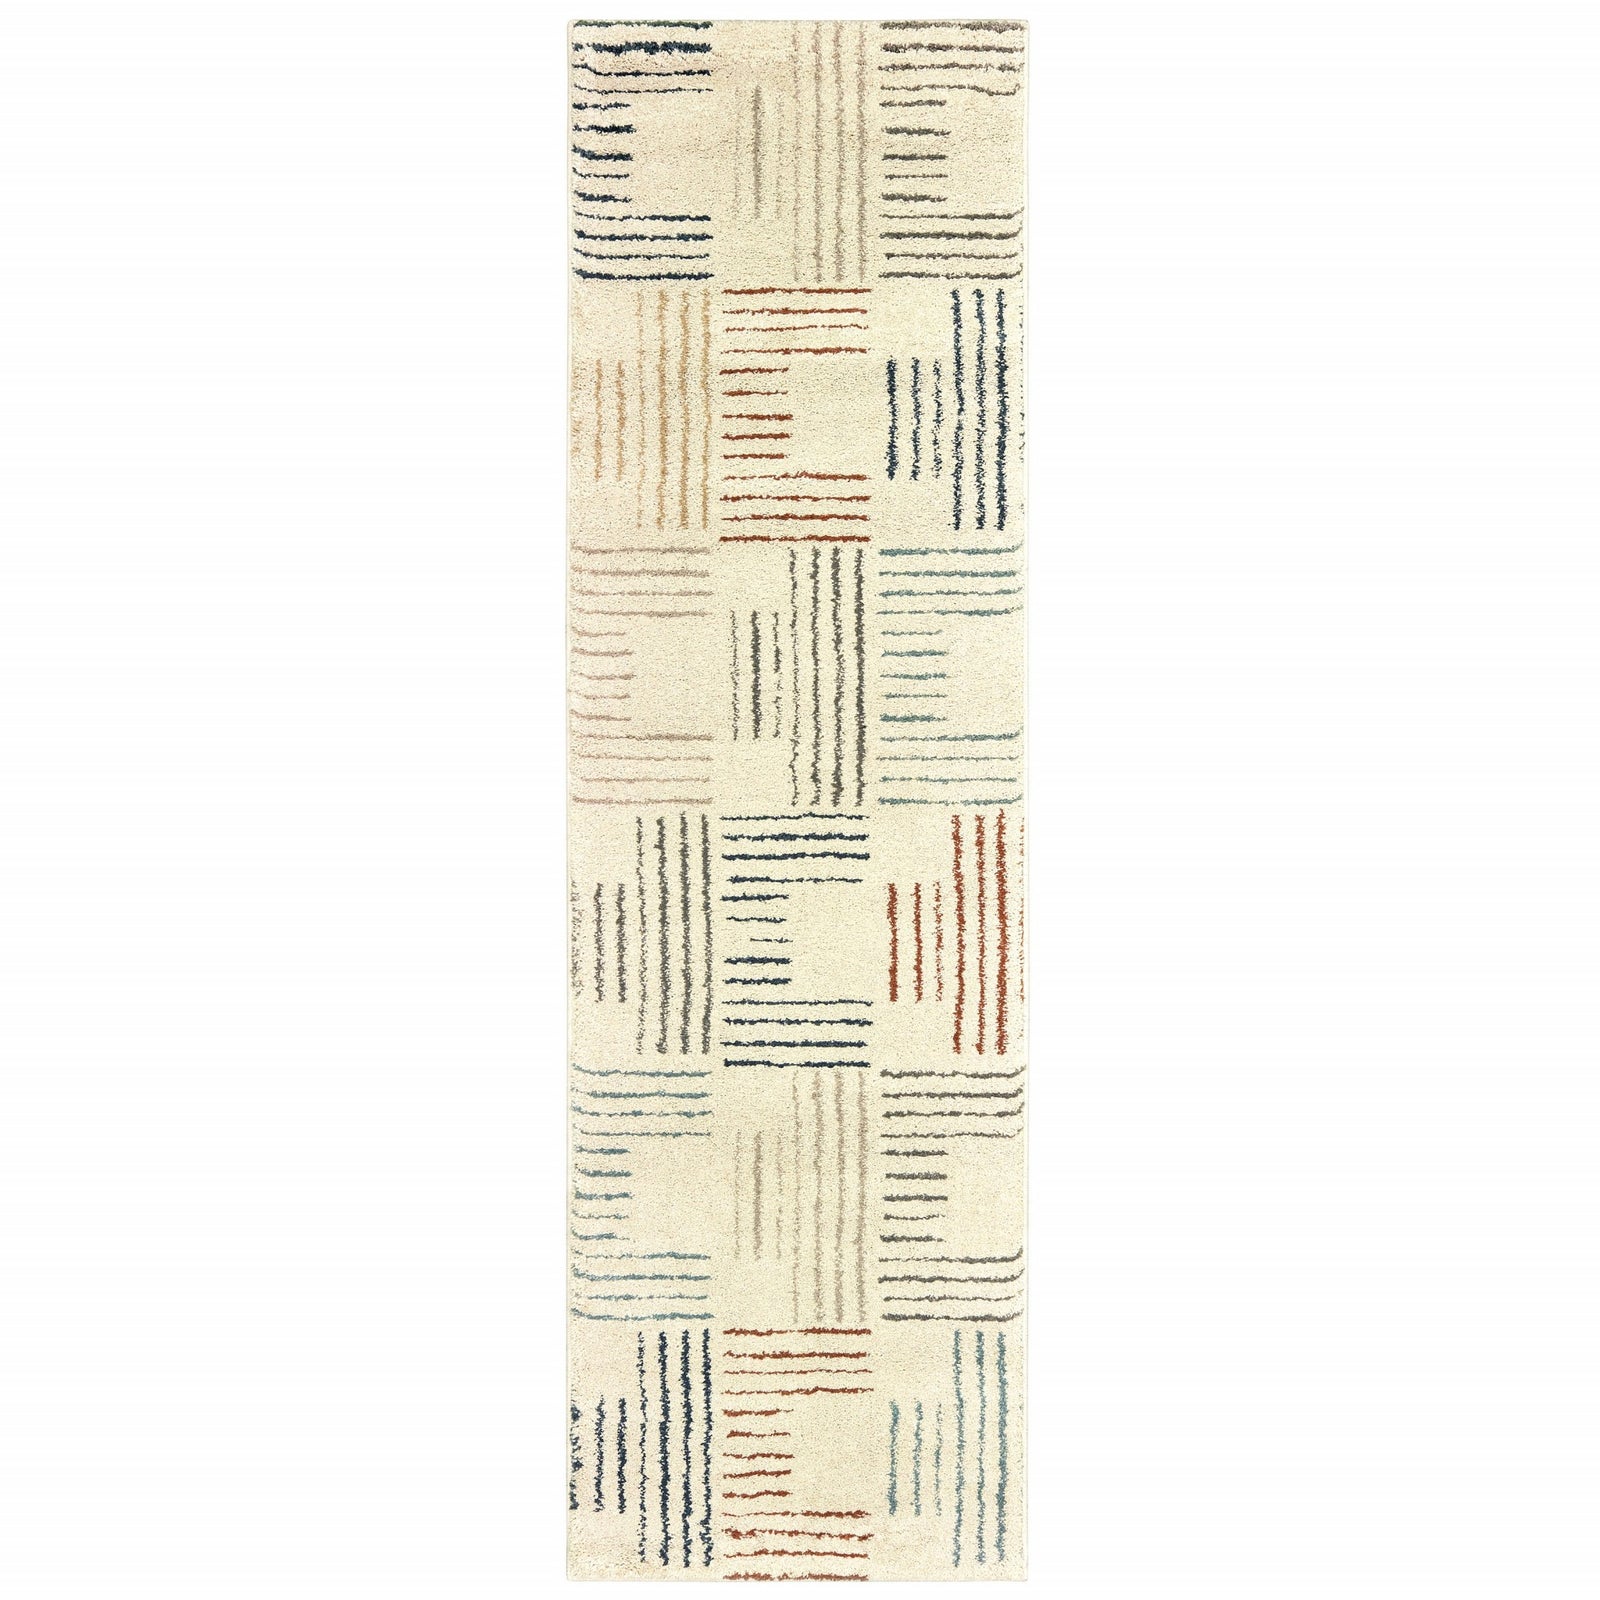 2' X 3' Ivory Multi Neutral Tone Scratch Indoor Accent Rug